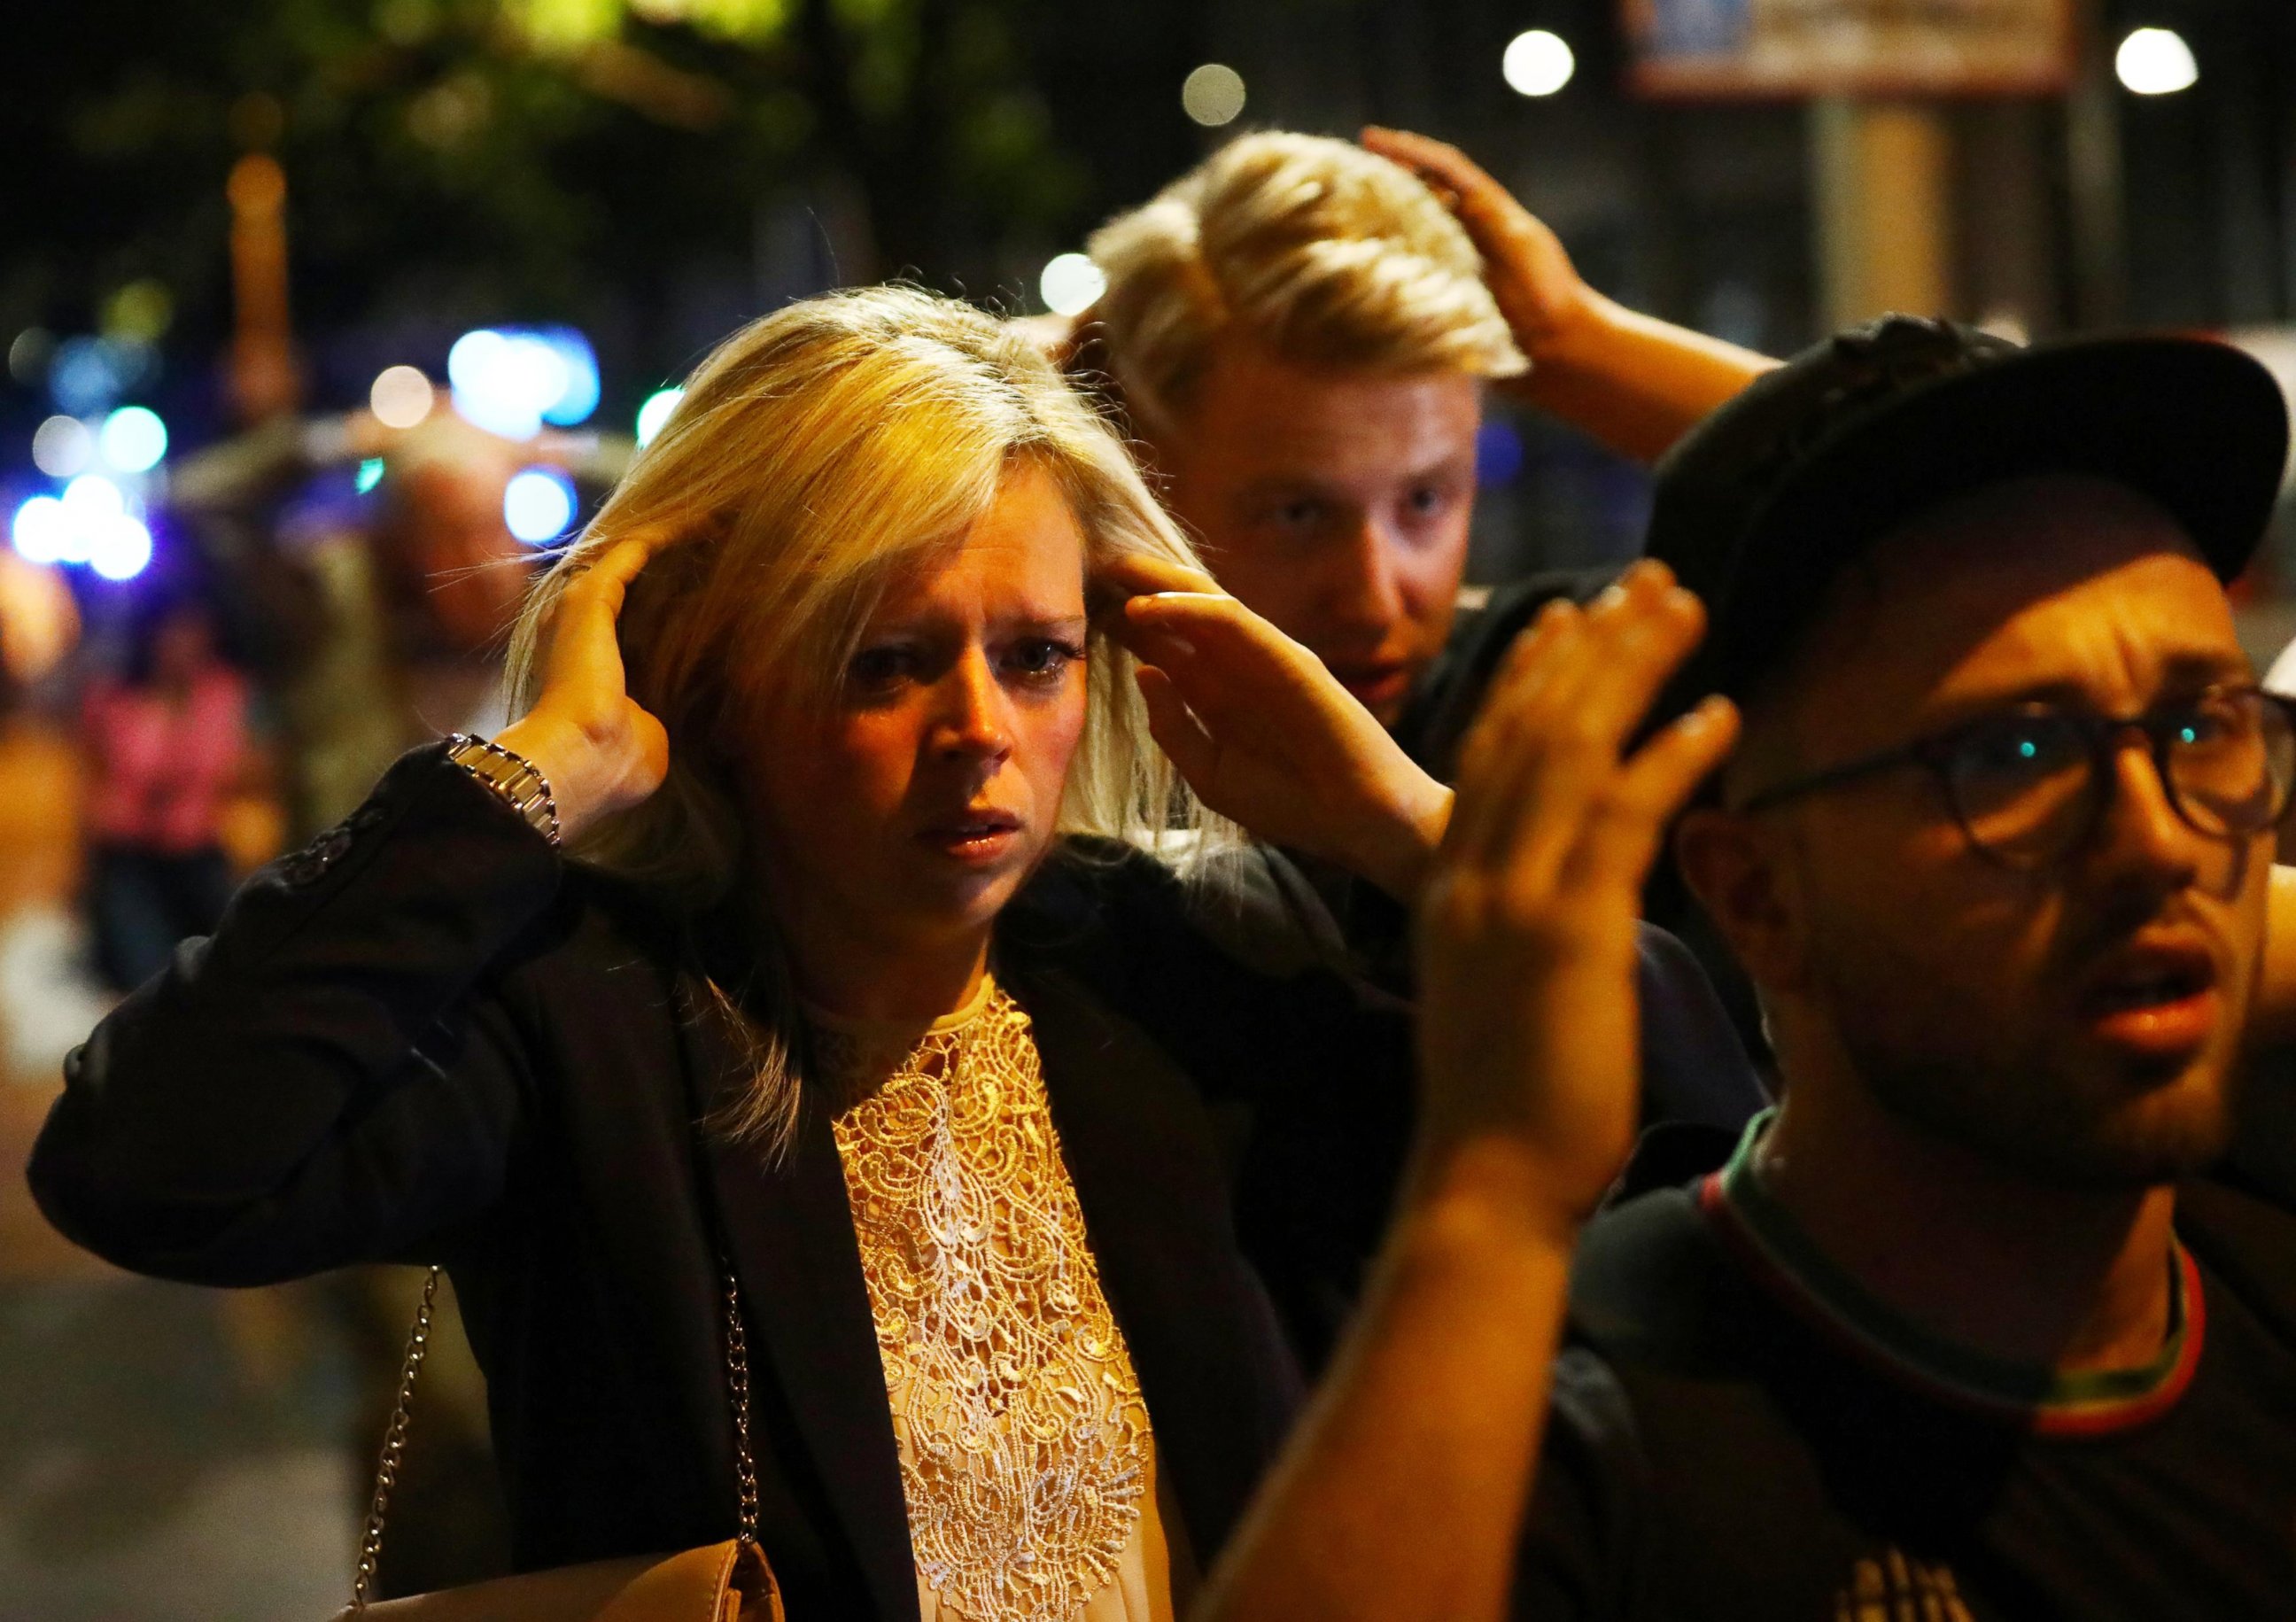 PHOTO: People leave the area with their hands up after an incident near London Bridge in London, Britain June 4, 2017.